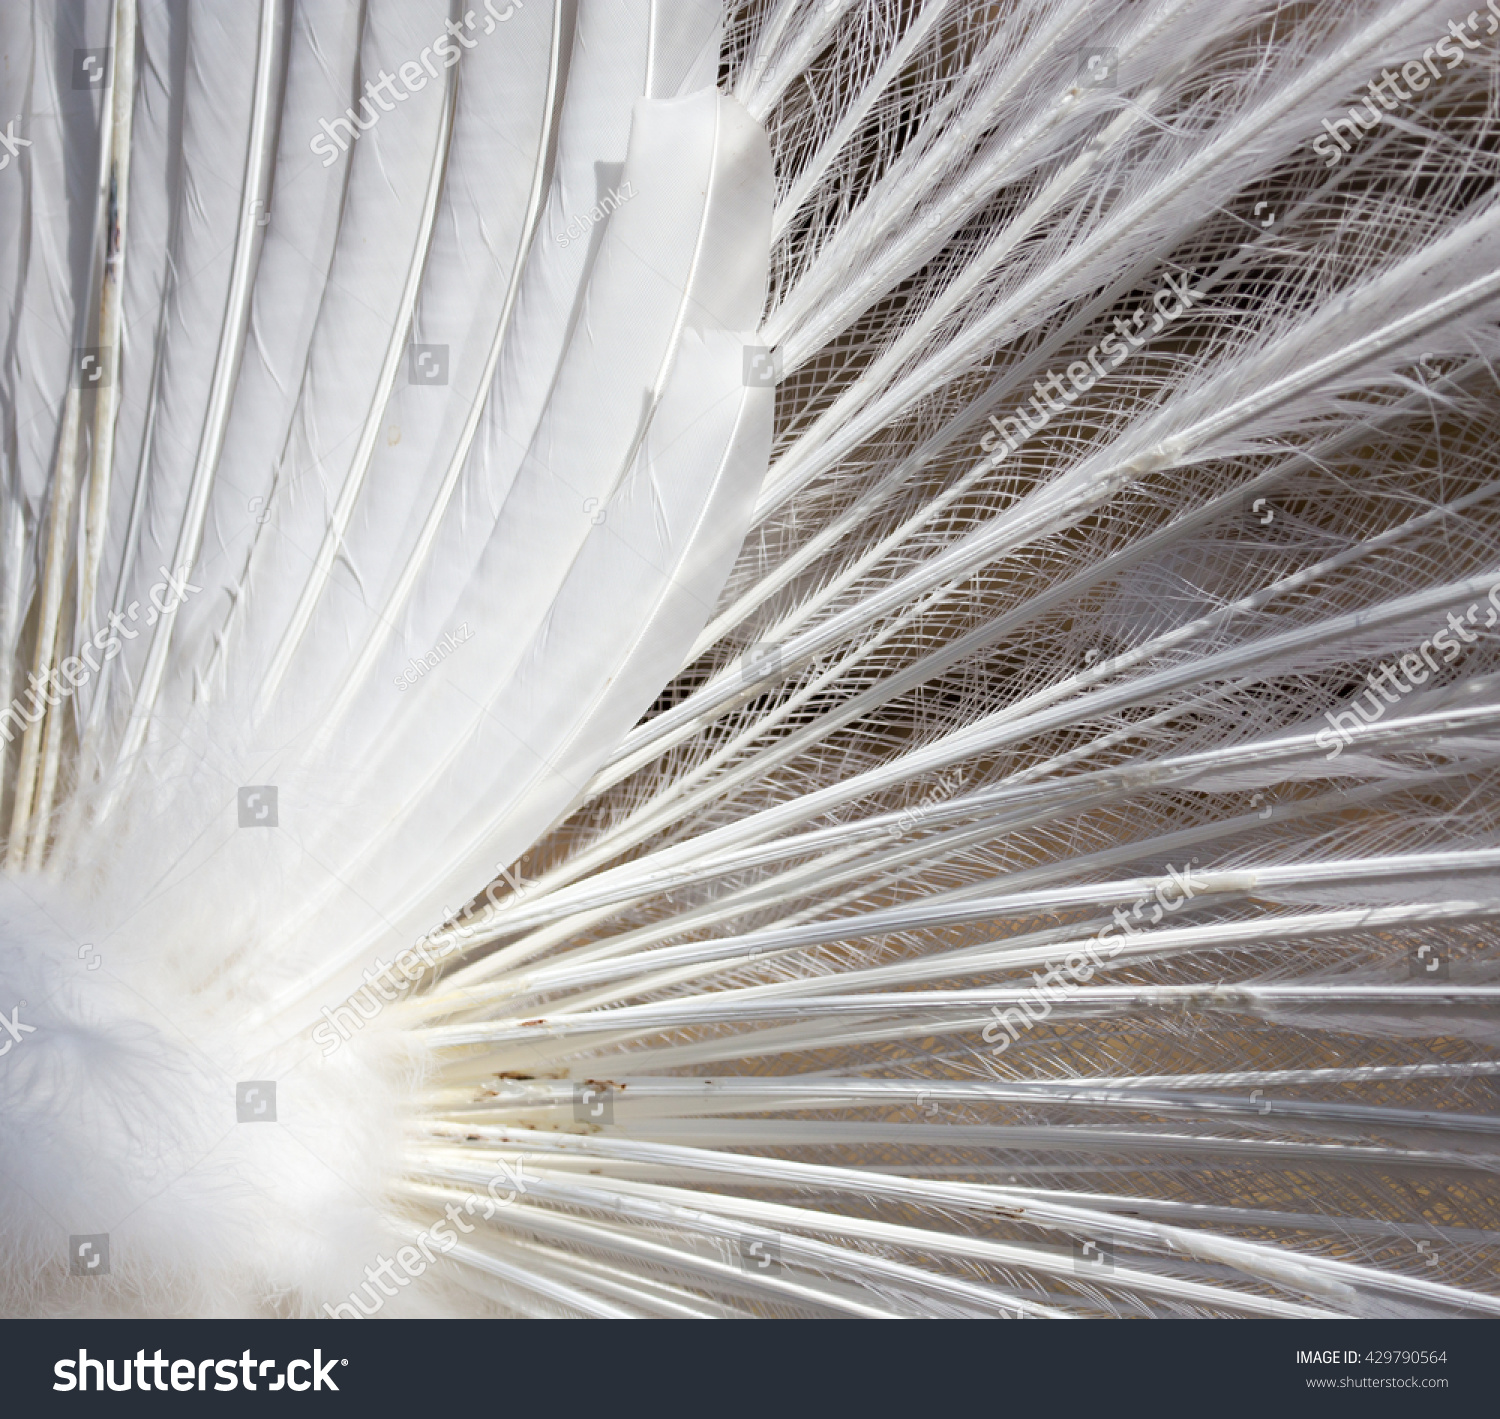 White Peacock Feathers Background Stock Photo (Royalty Free ...